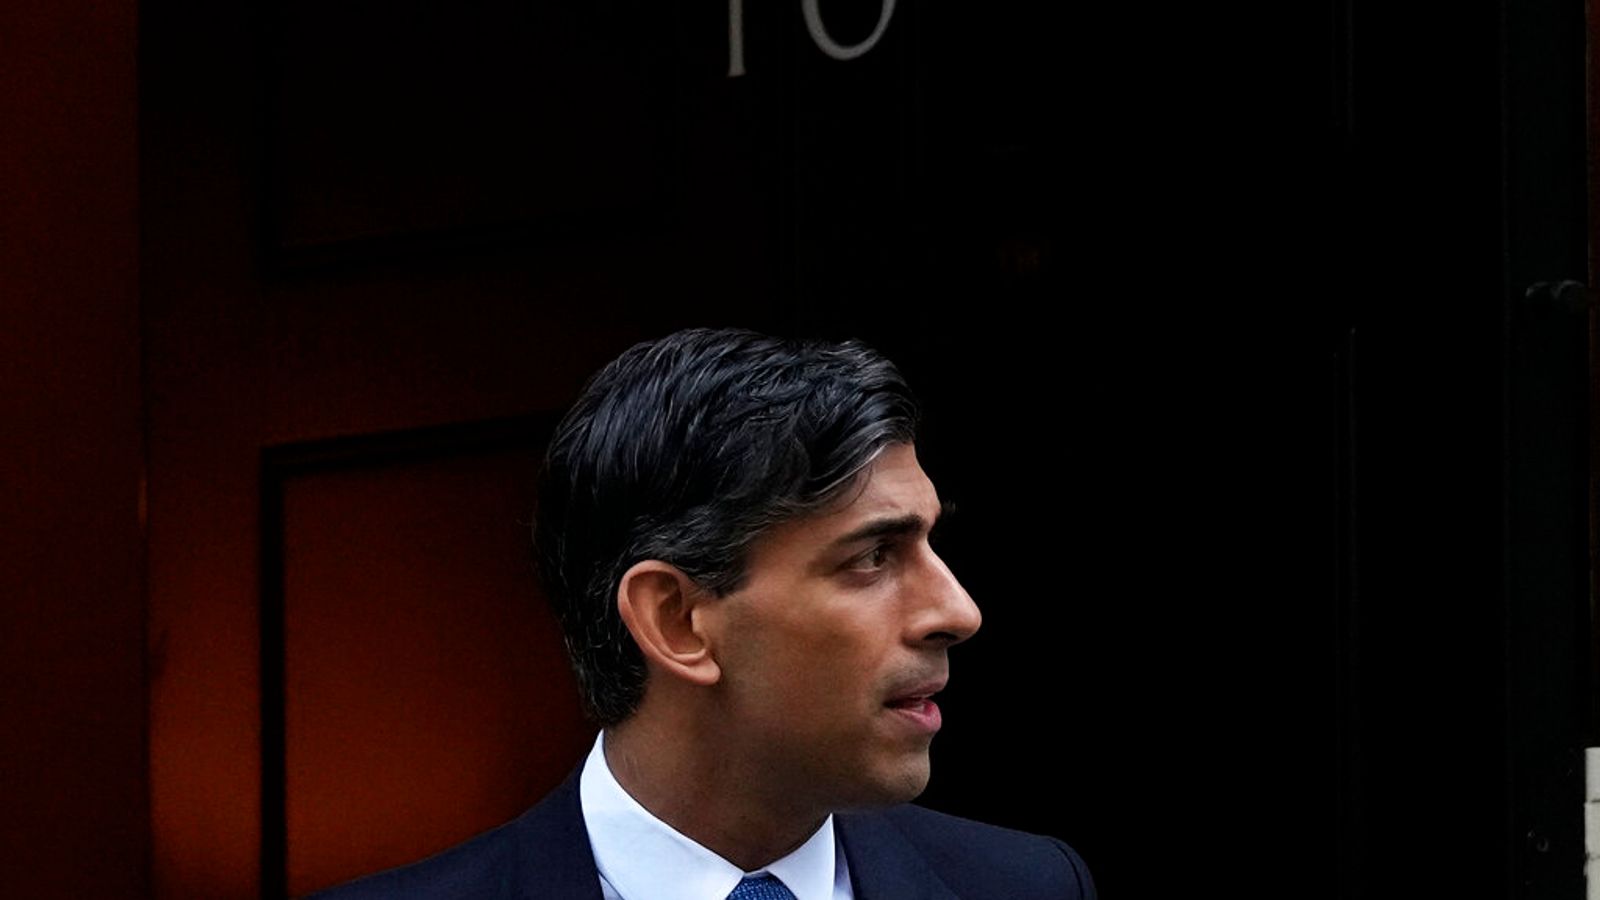 Rishi Sunak's slip-ups give enemies perfect opportunity to brand PM out of touch